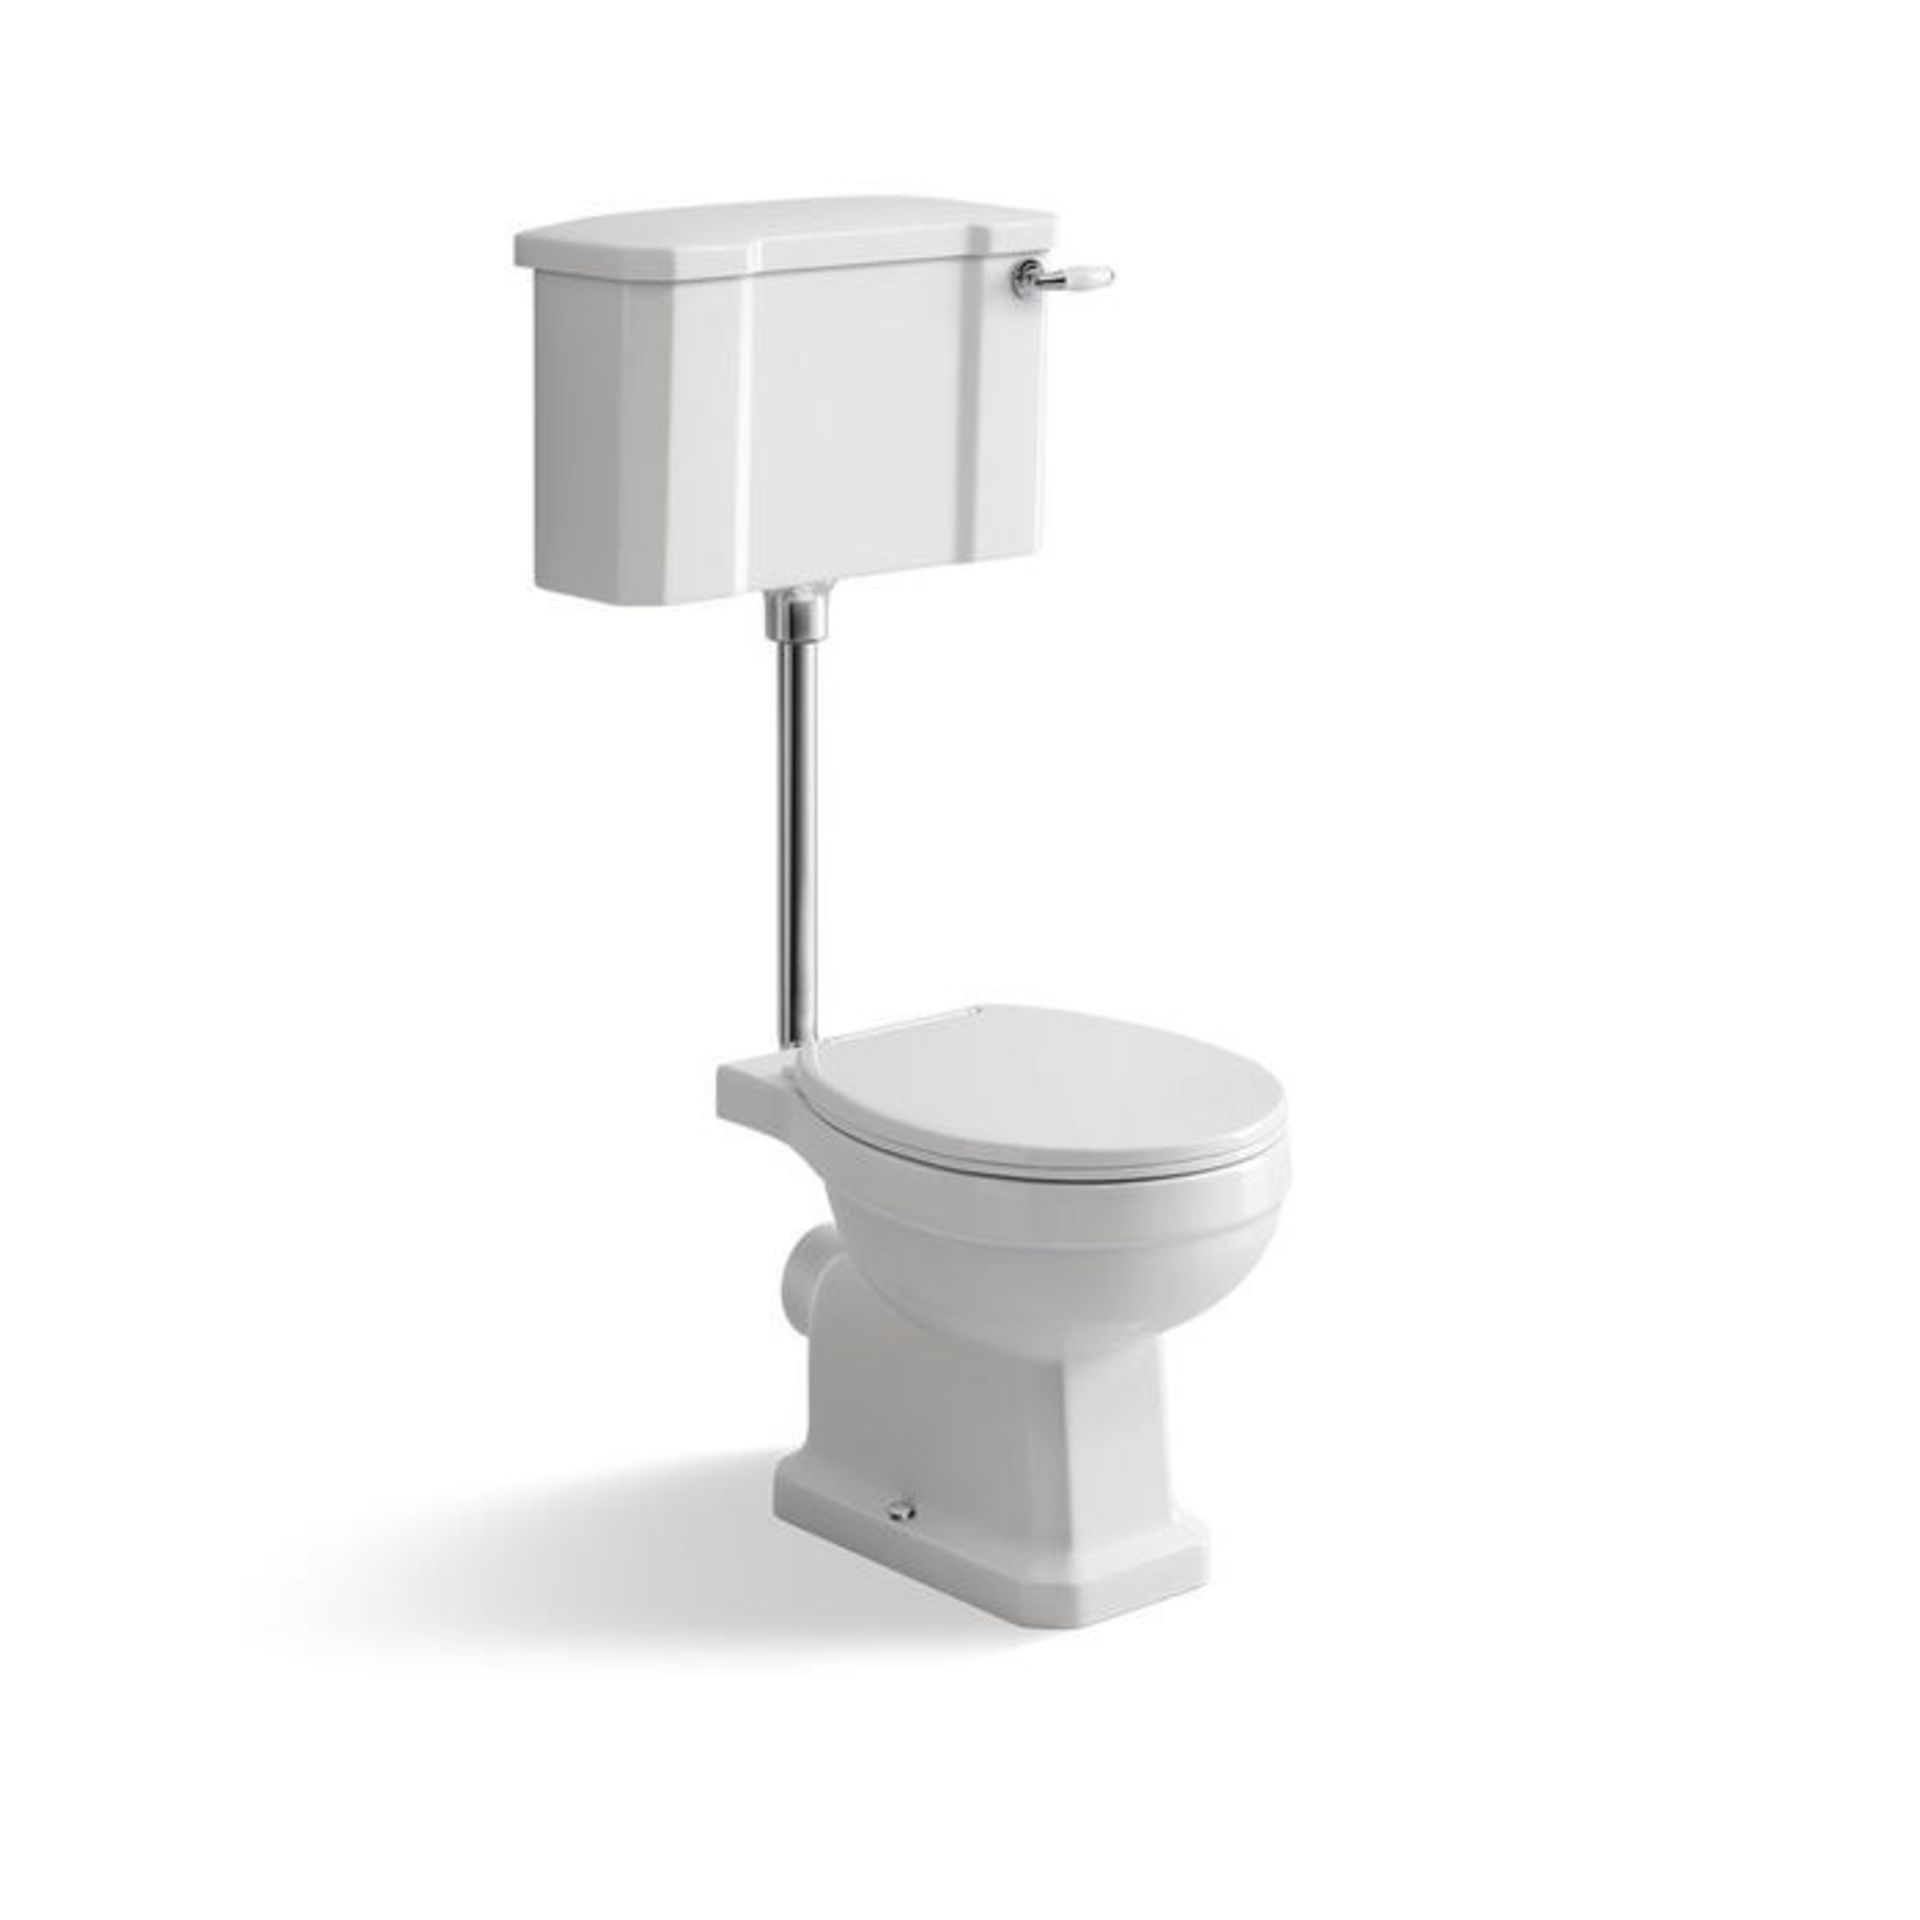 (AA13) ) Cambridge Traditional Toilet with Low-Level Cistern - White Seat. RRP £499.99.The tr... - Image 3 of 4